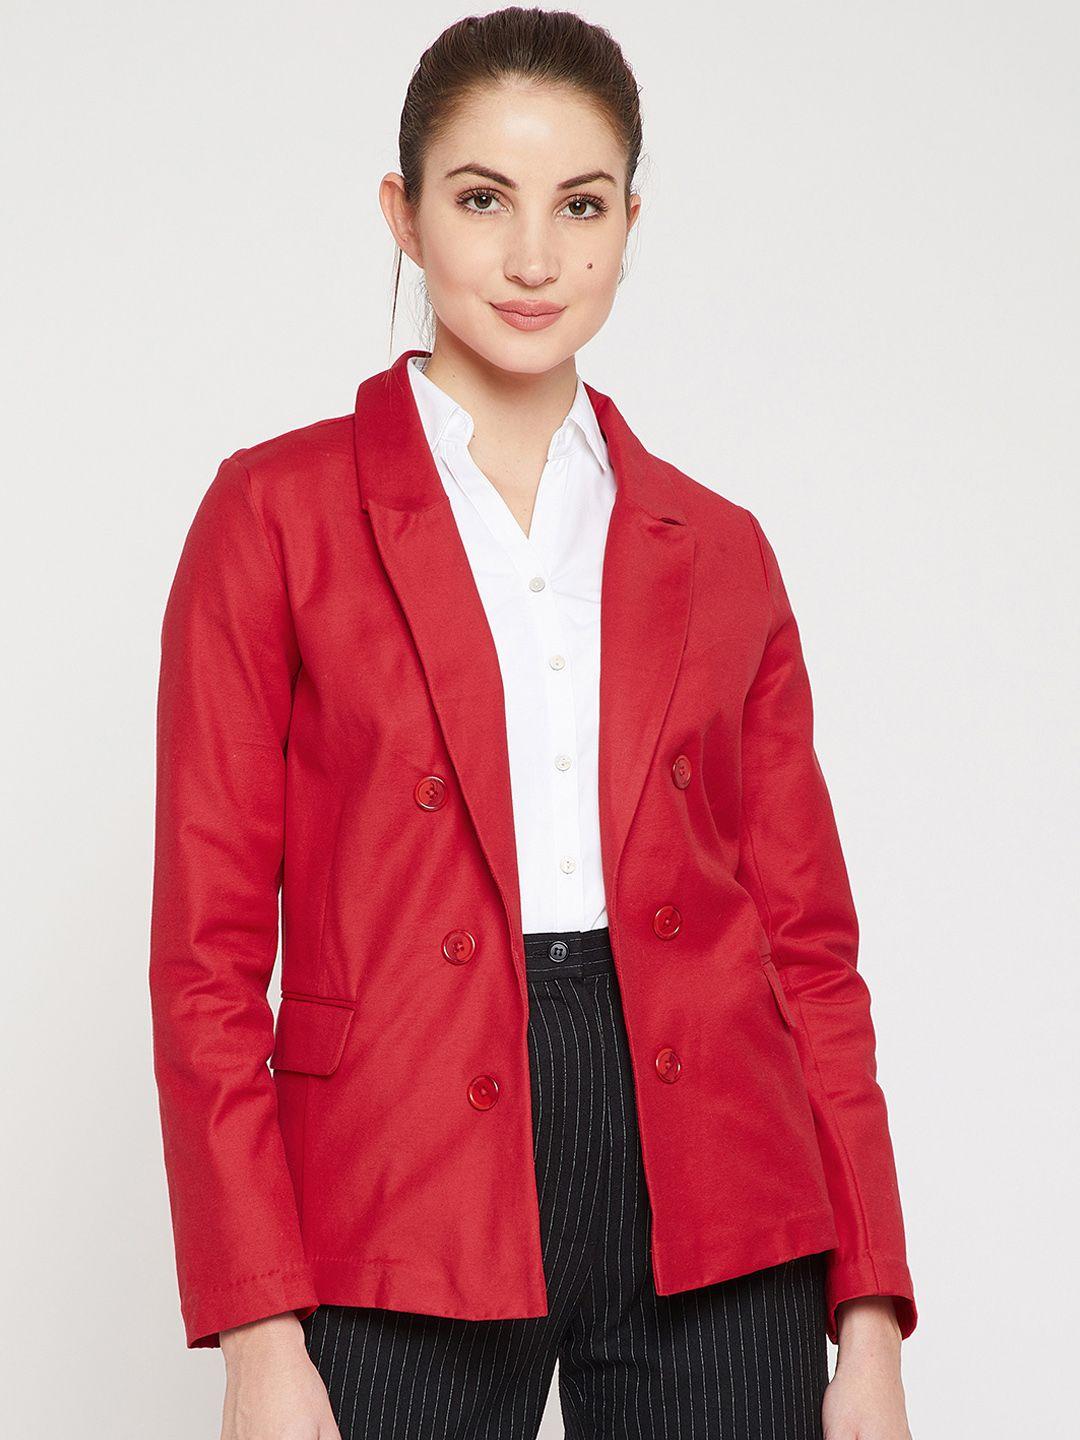 marie claire women red solid single-breasted pure cotton blazer